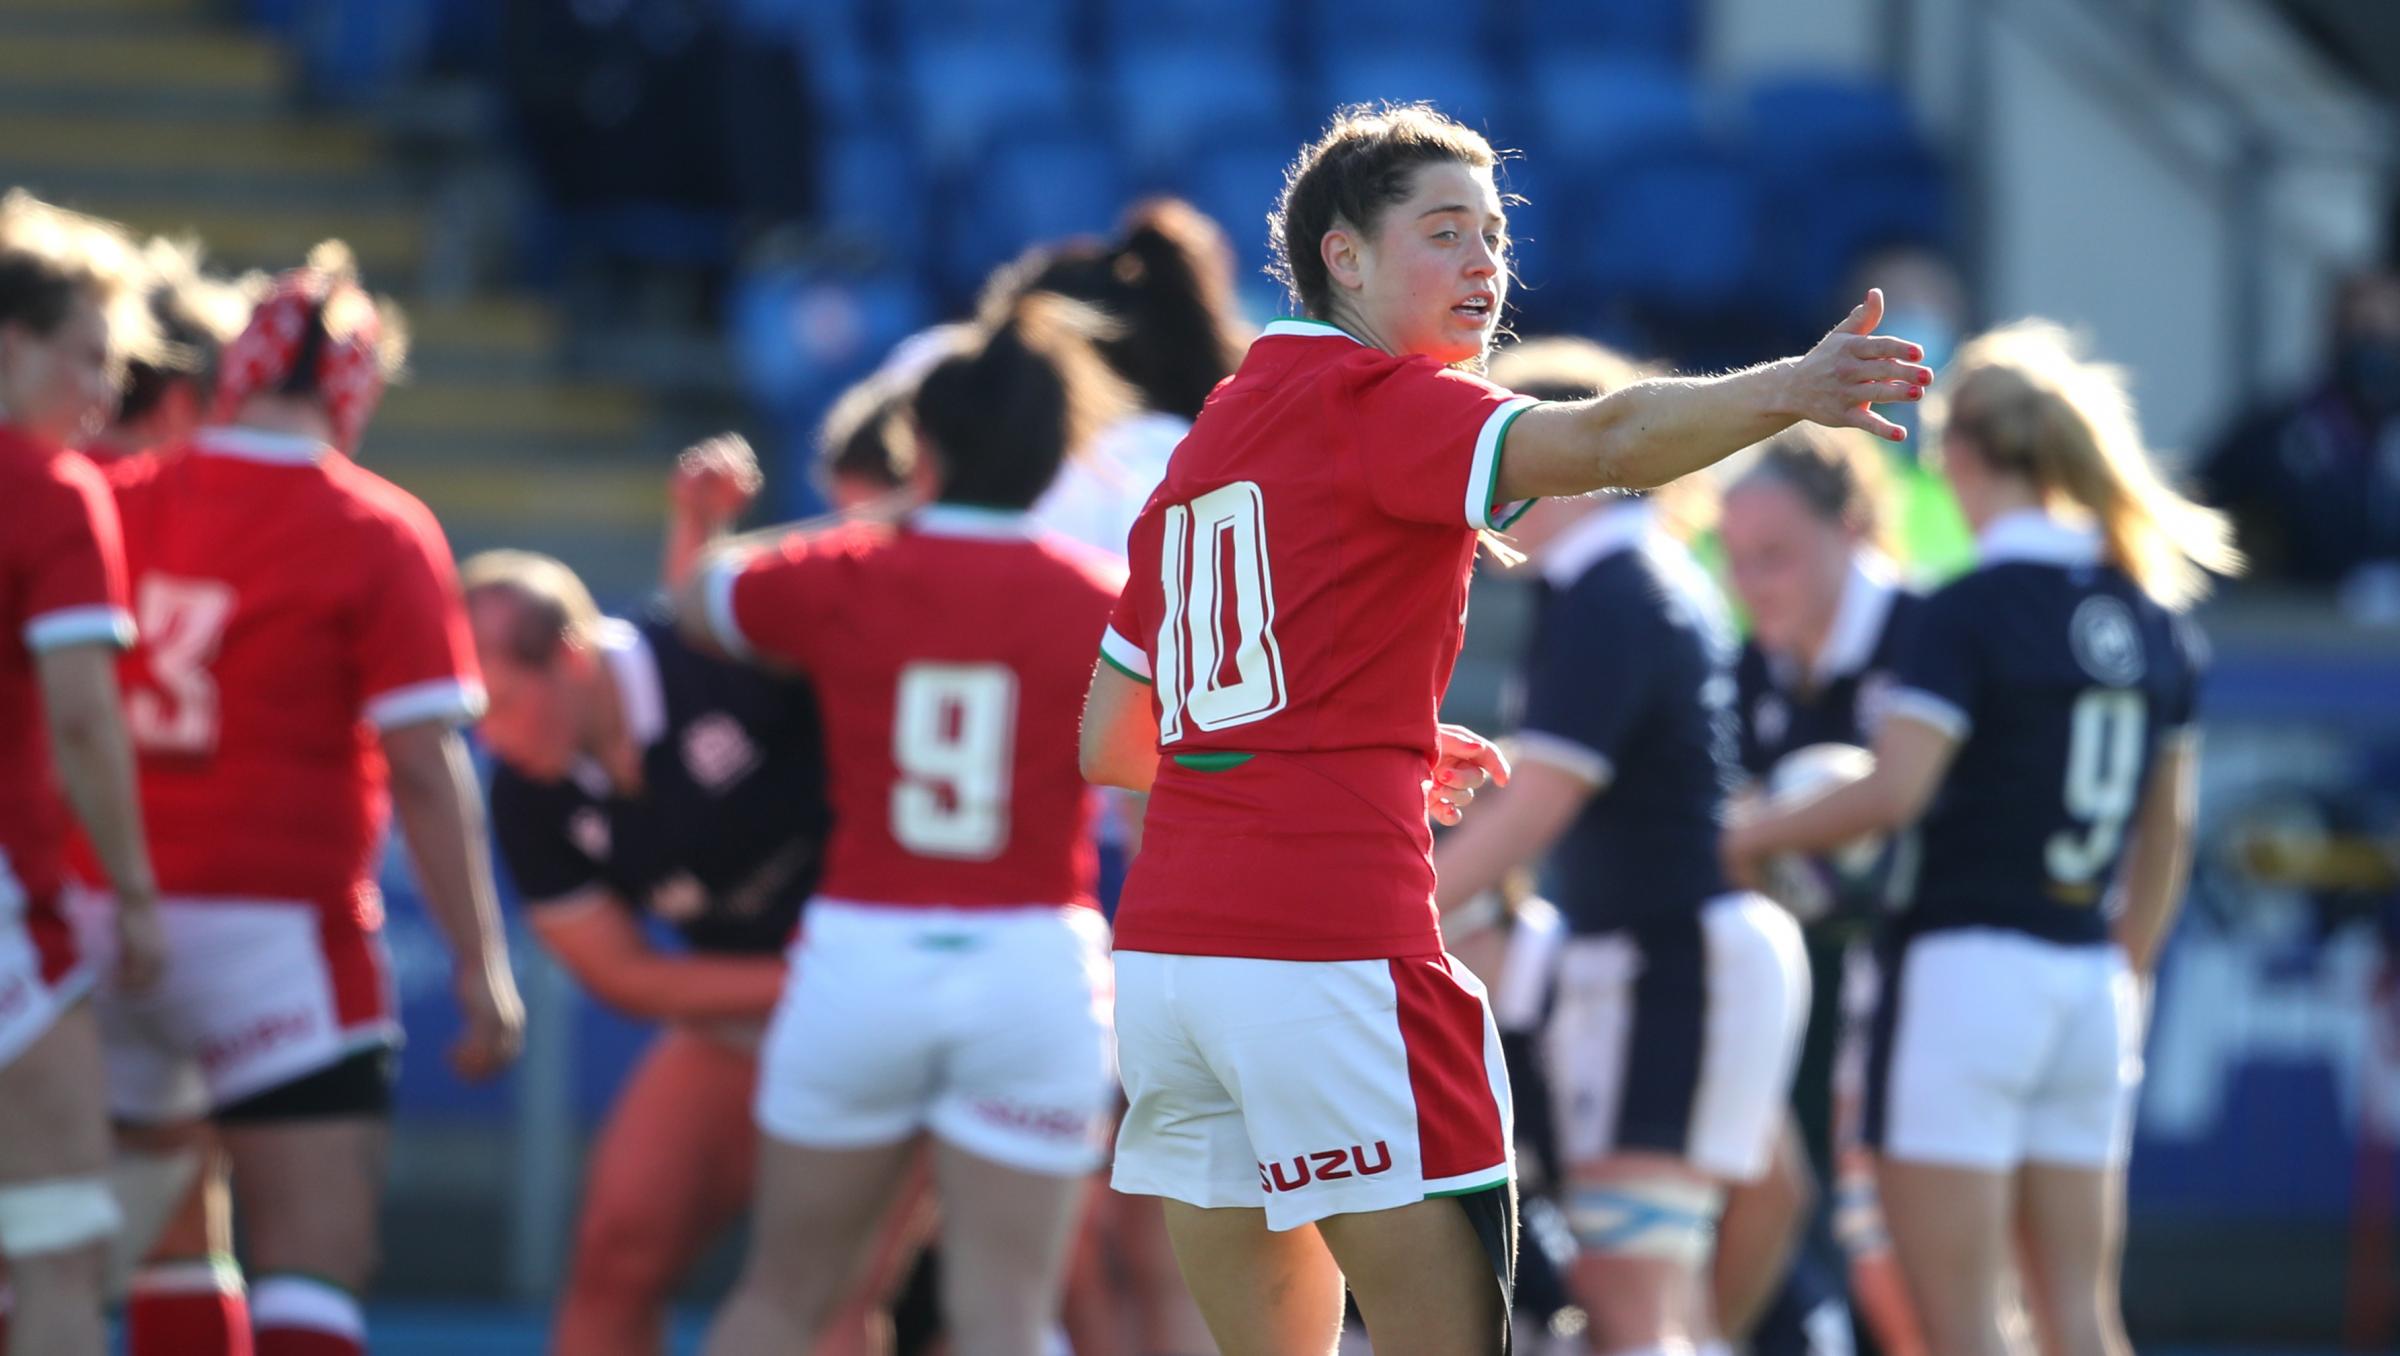 Wales Robyn Wilkins gives instructions to her teammates during the Guinness Womens Six Nations match at Scotstoun Stadium, Glasgow. Issue date: Saturday April 24, 2021. PA Photo. See PA story: RUGBYU Scotland Women. Photo credit should read: Andrew